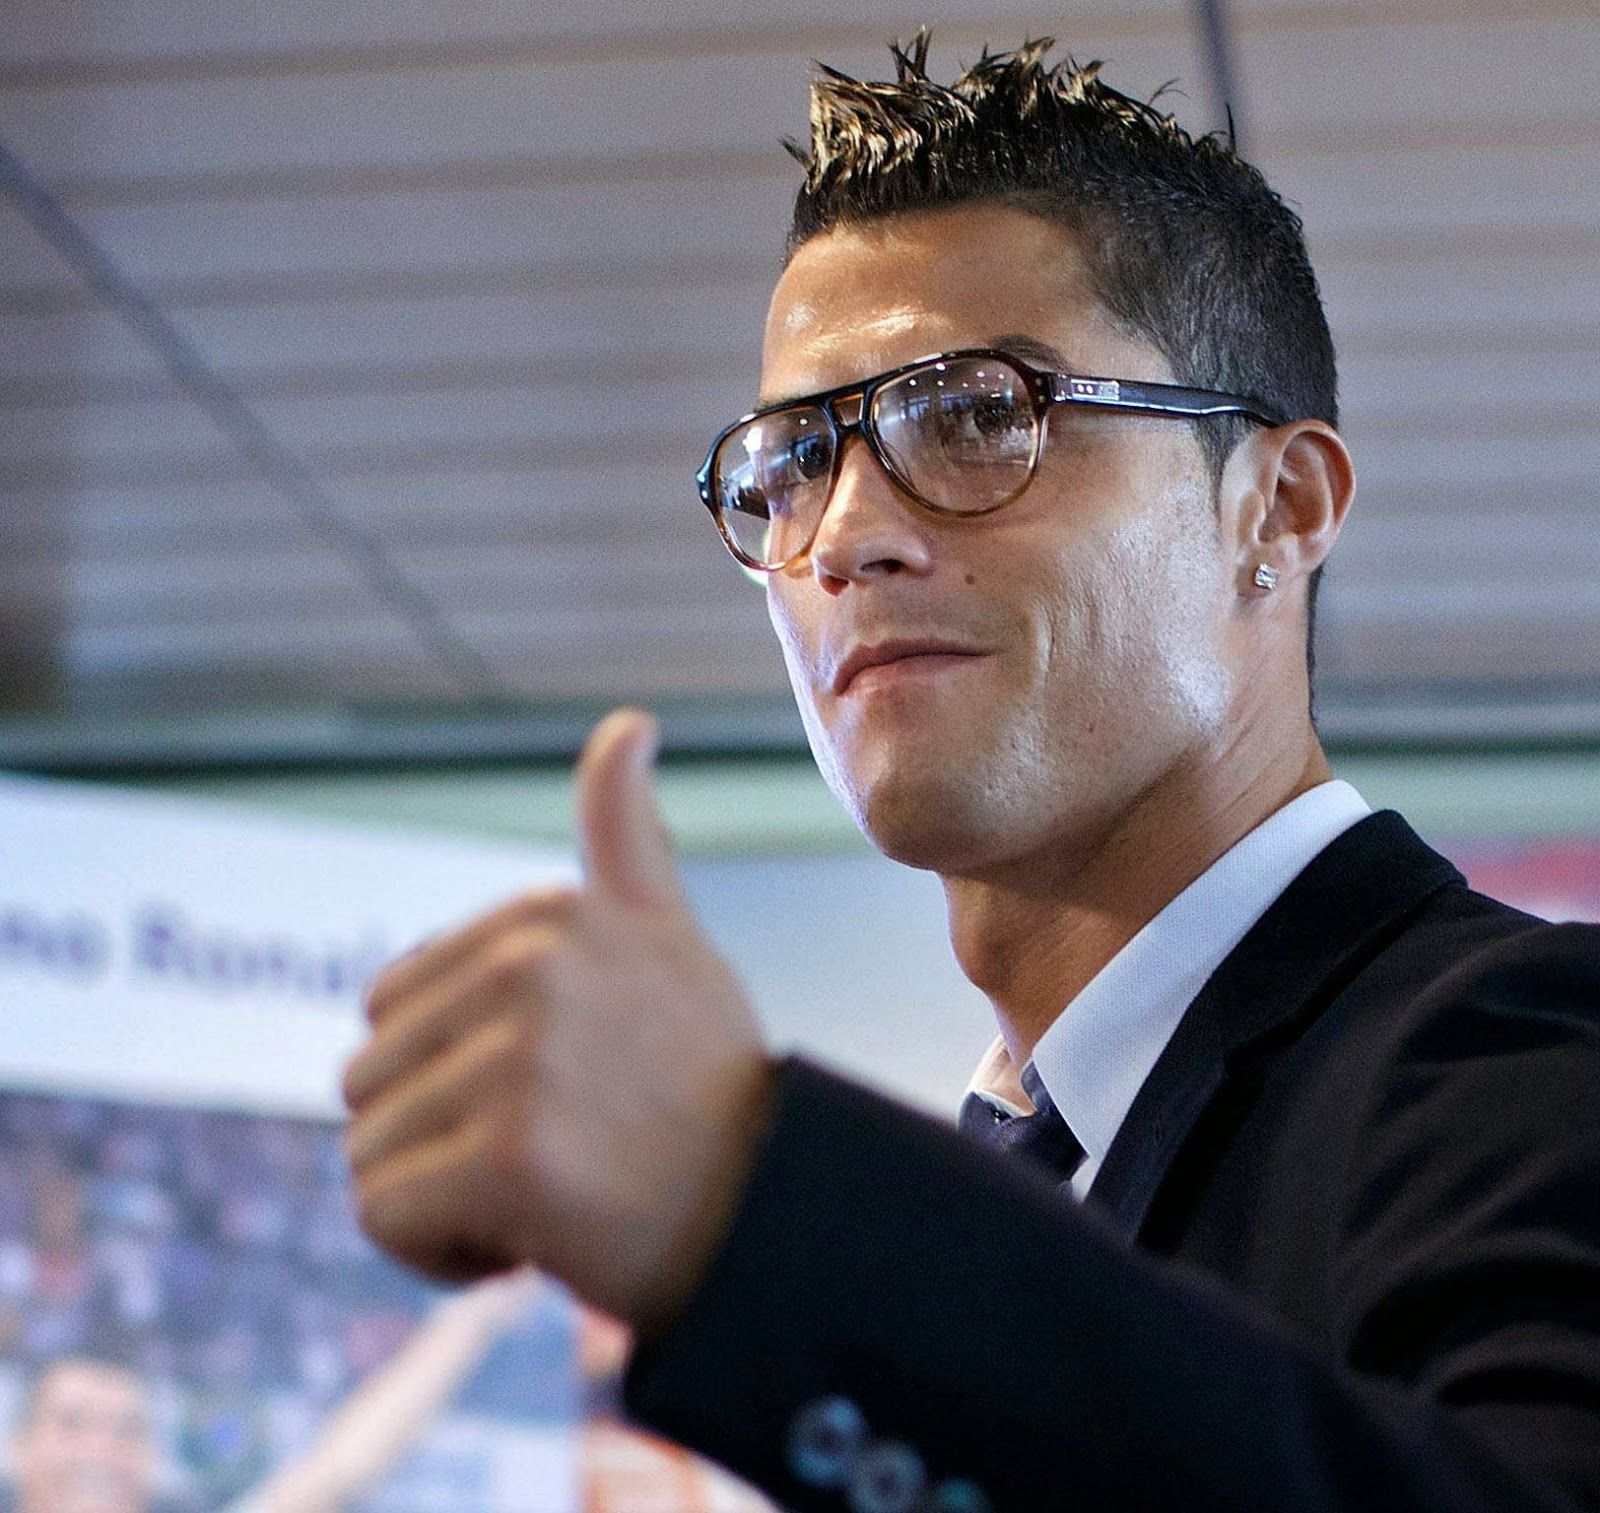 Cristiano Ronaldo Real Madrid Manchester United: Exit, new clubs for CR7